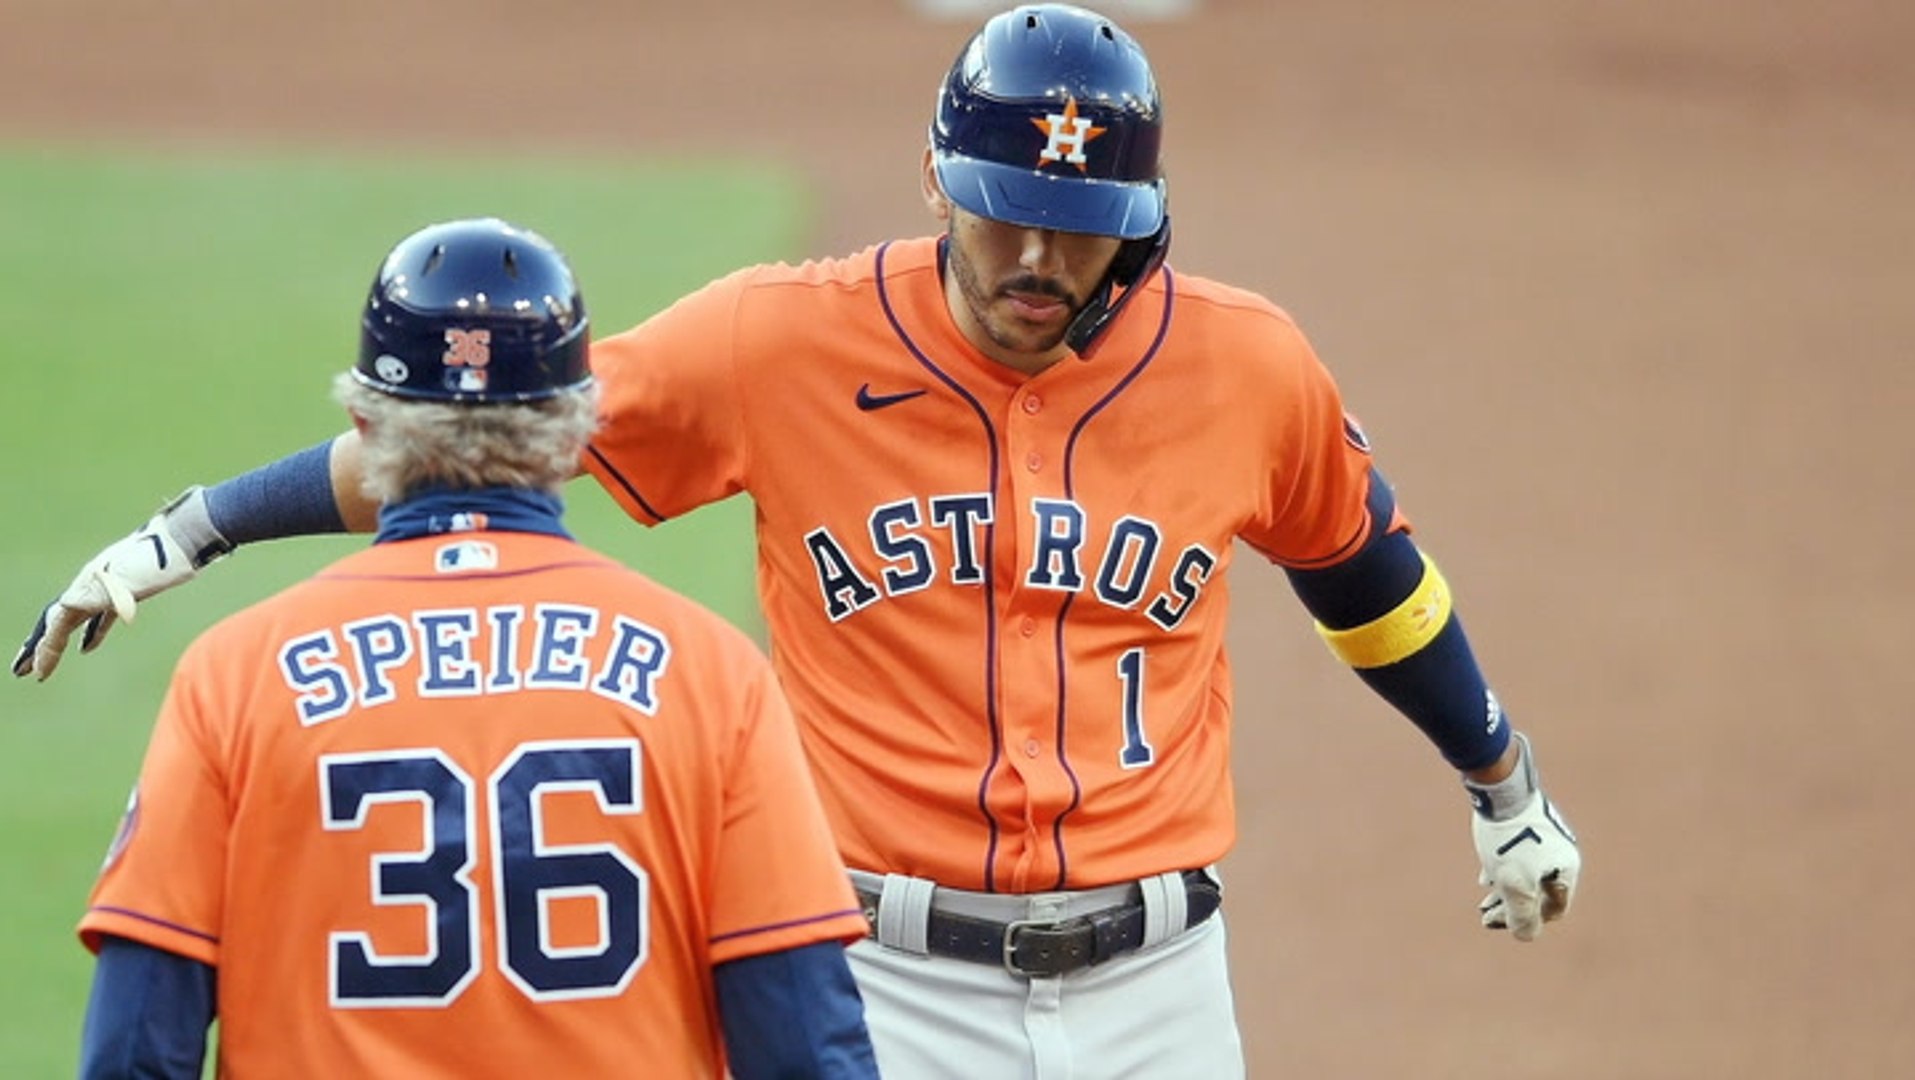 Astros Beat Rays 7-4, Force Game 7 of ALCS